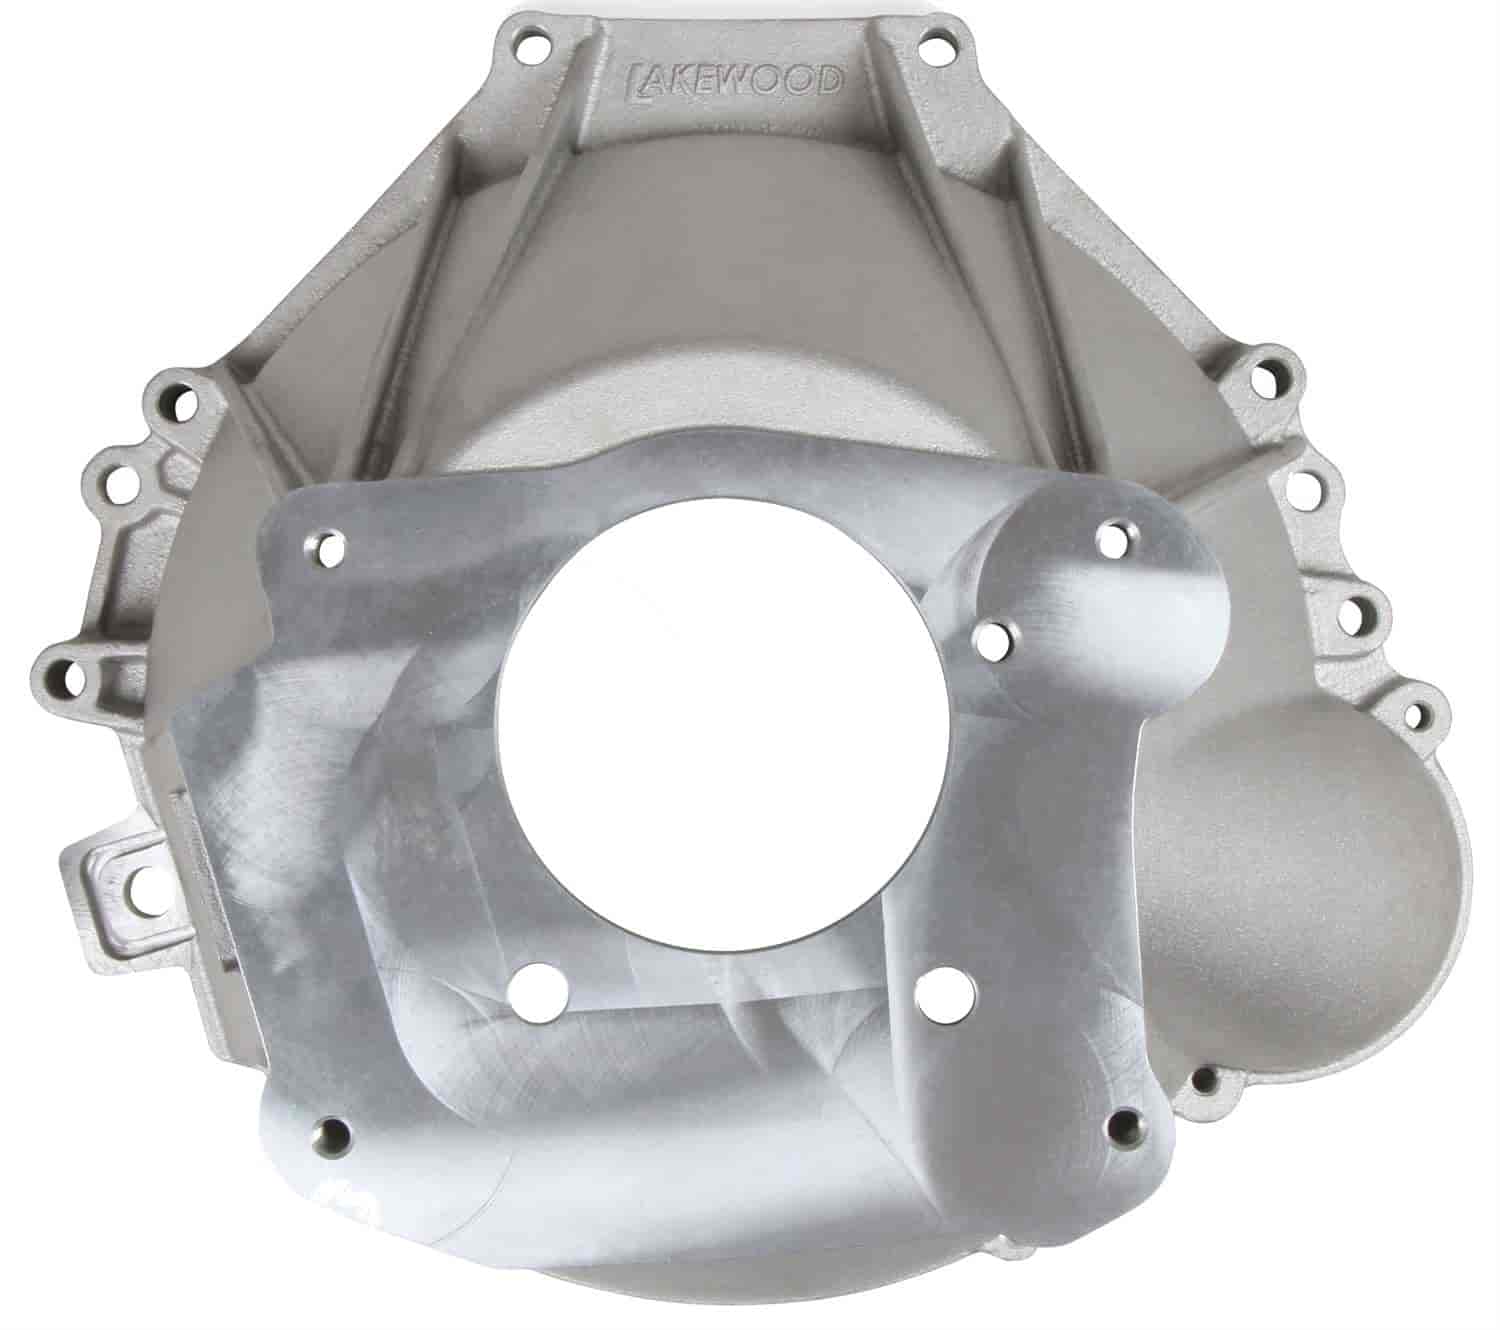 Cast-Aluminum Bellhousing for Small Block Ford Engine to Ford-Style TKX, TKO 500/600 or TR3550 Transmission